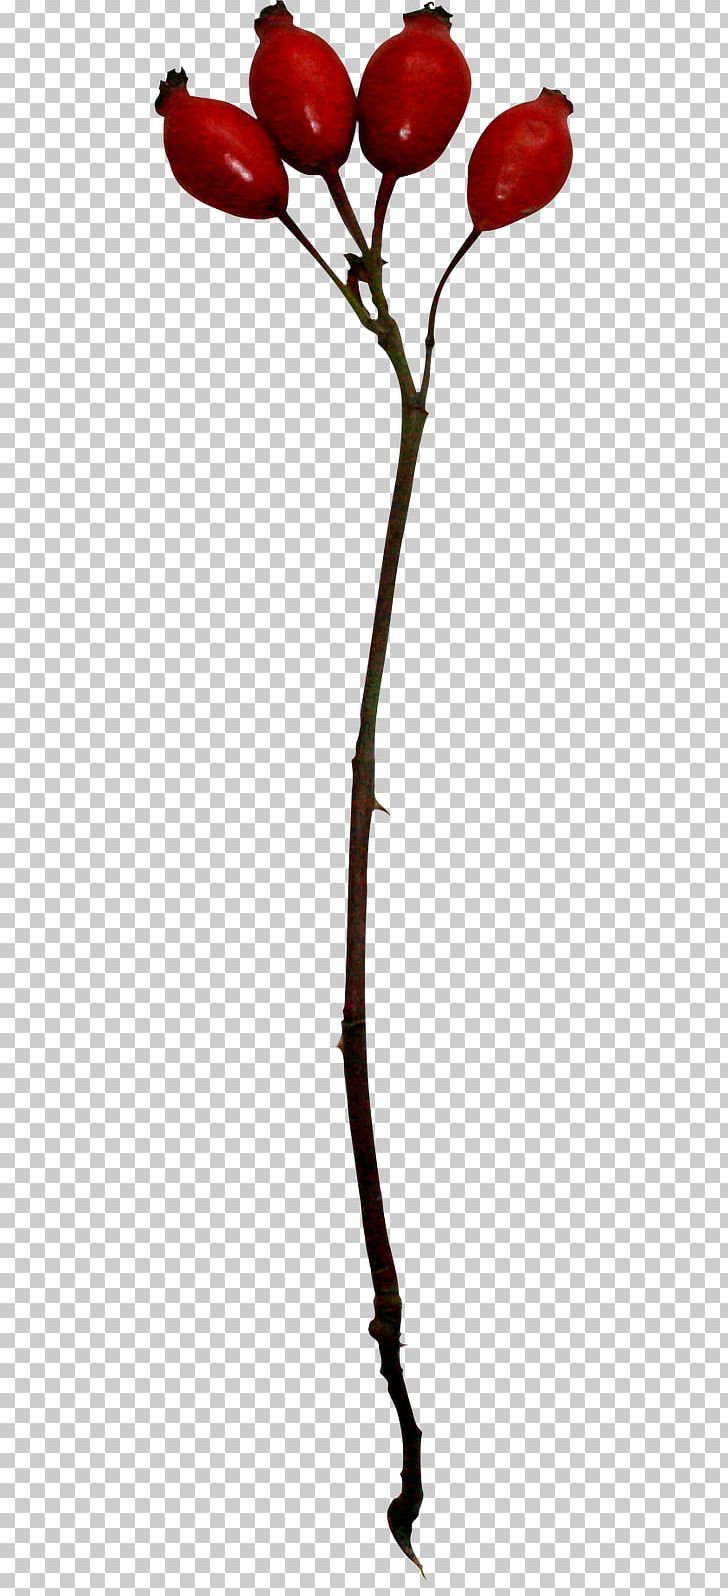 Spanish 28 June Scrapbooking Flowering Plant Twig PNG, Clipart, 28 June, Align, Branch, Dogrose, Download File Free PNG Download